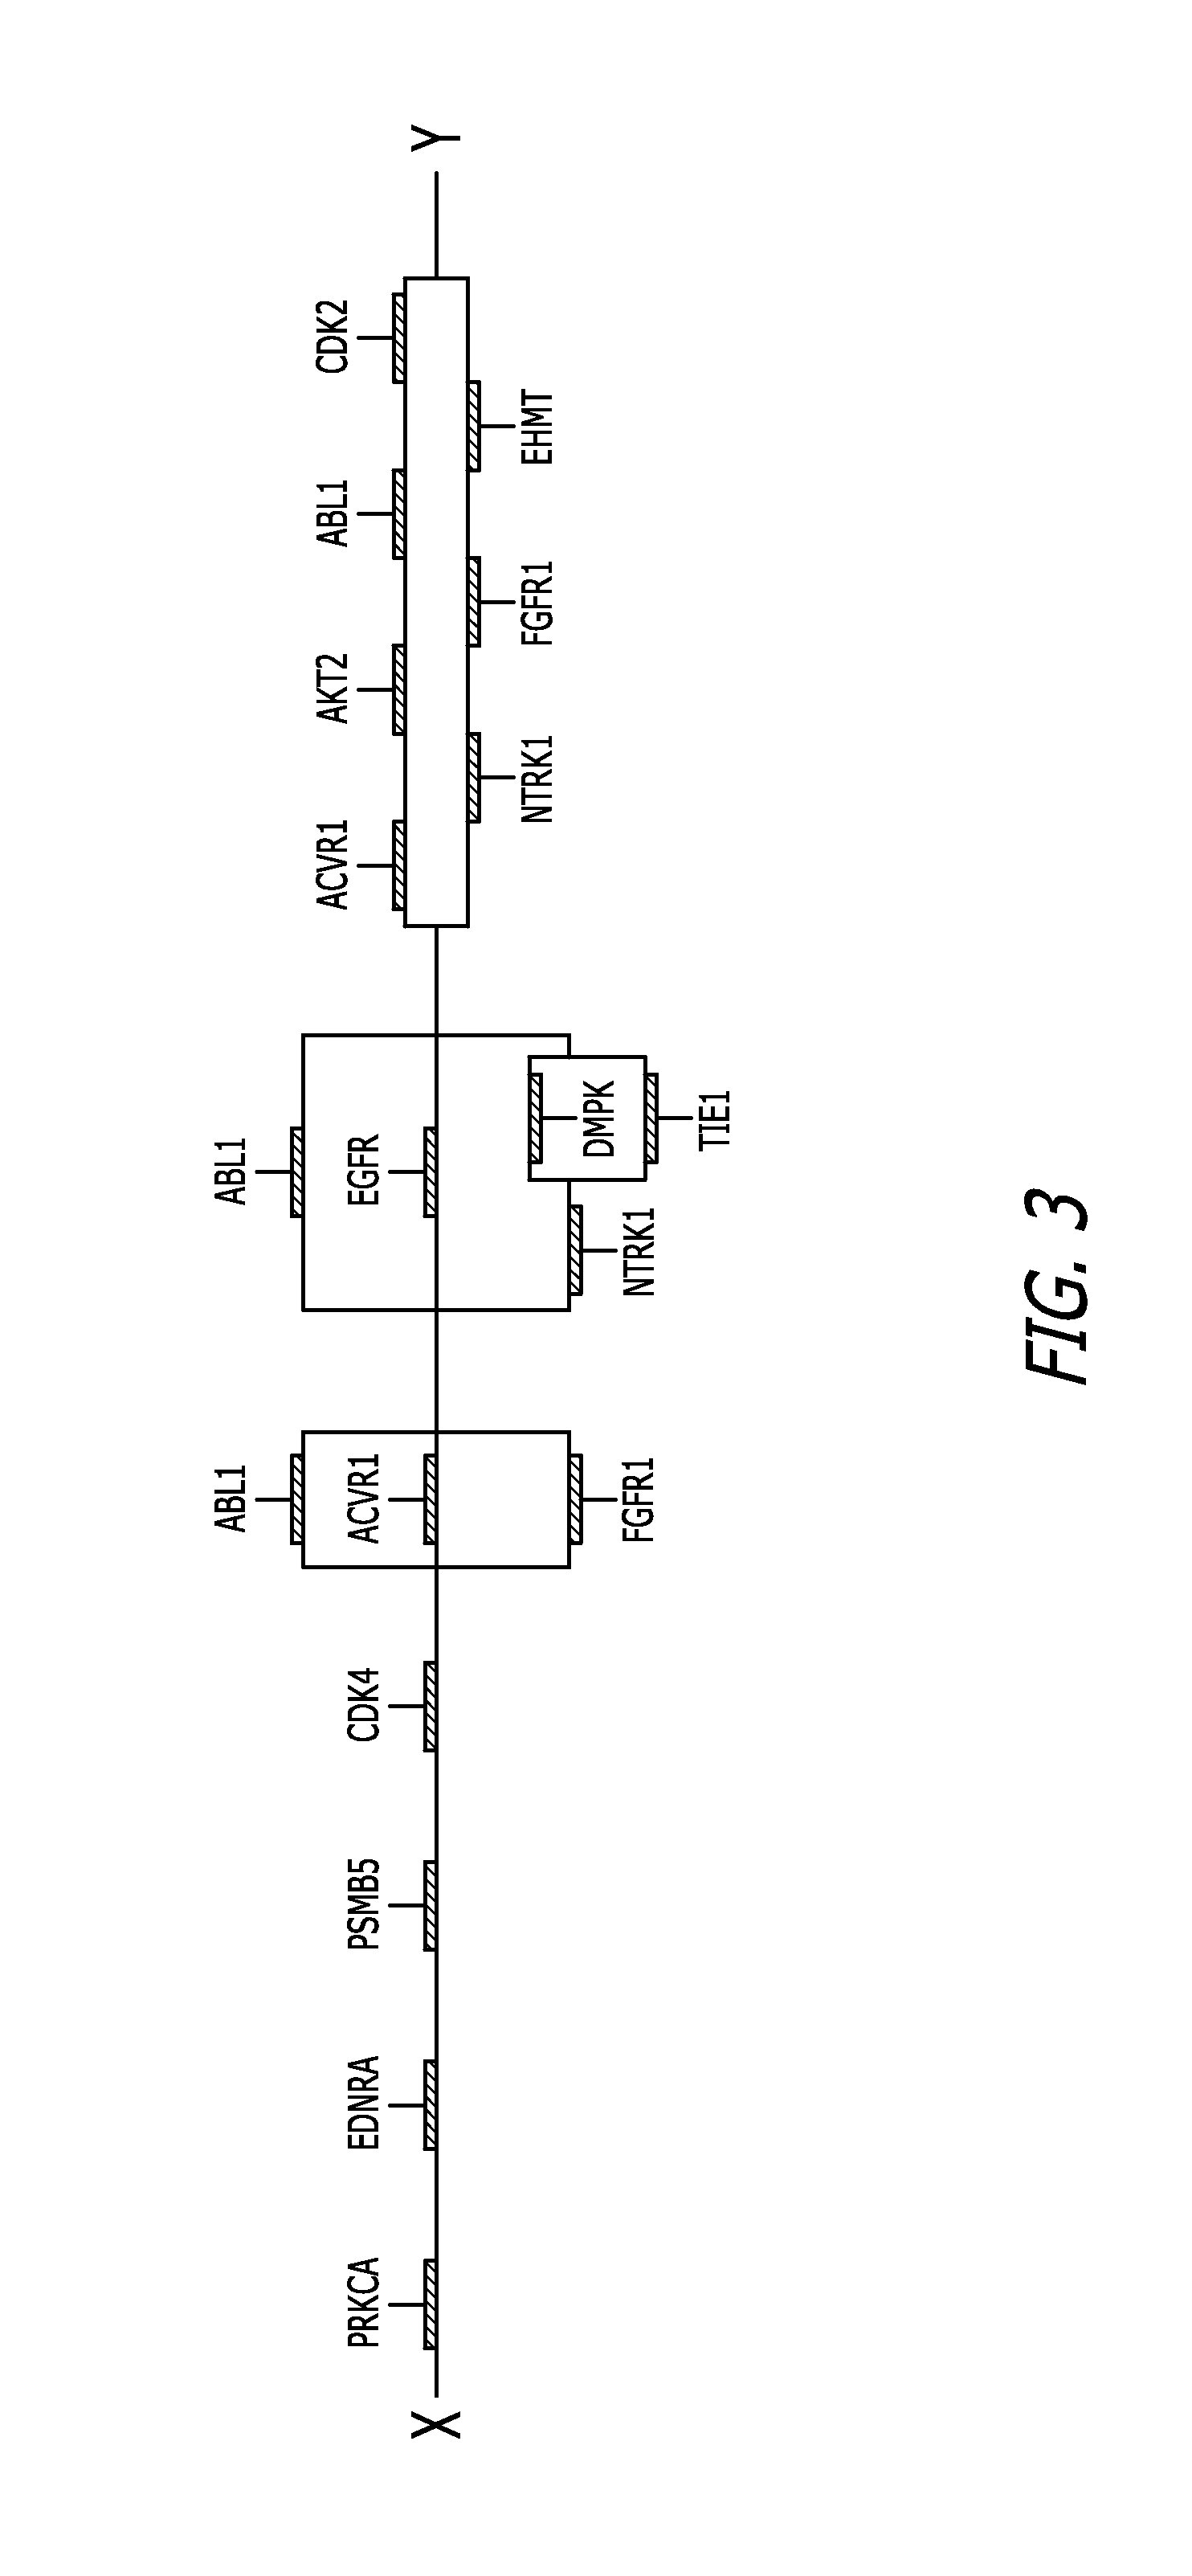 Target inhibition map system for combination therapy design and methods of using same